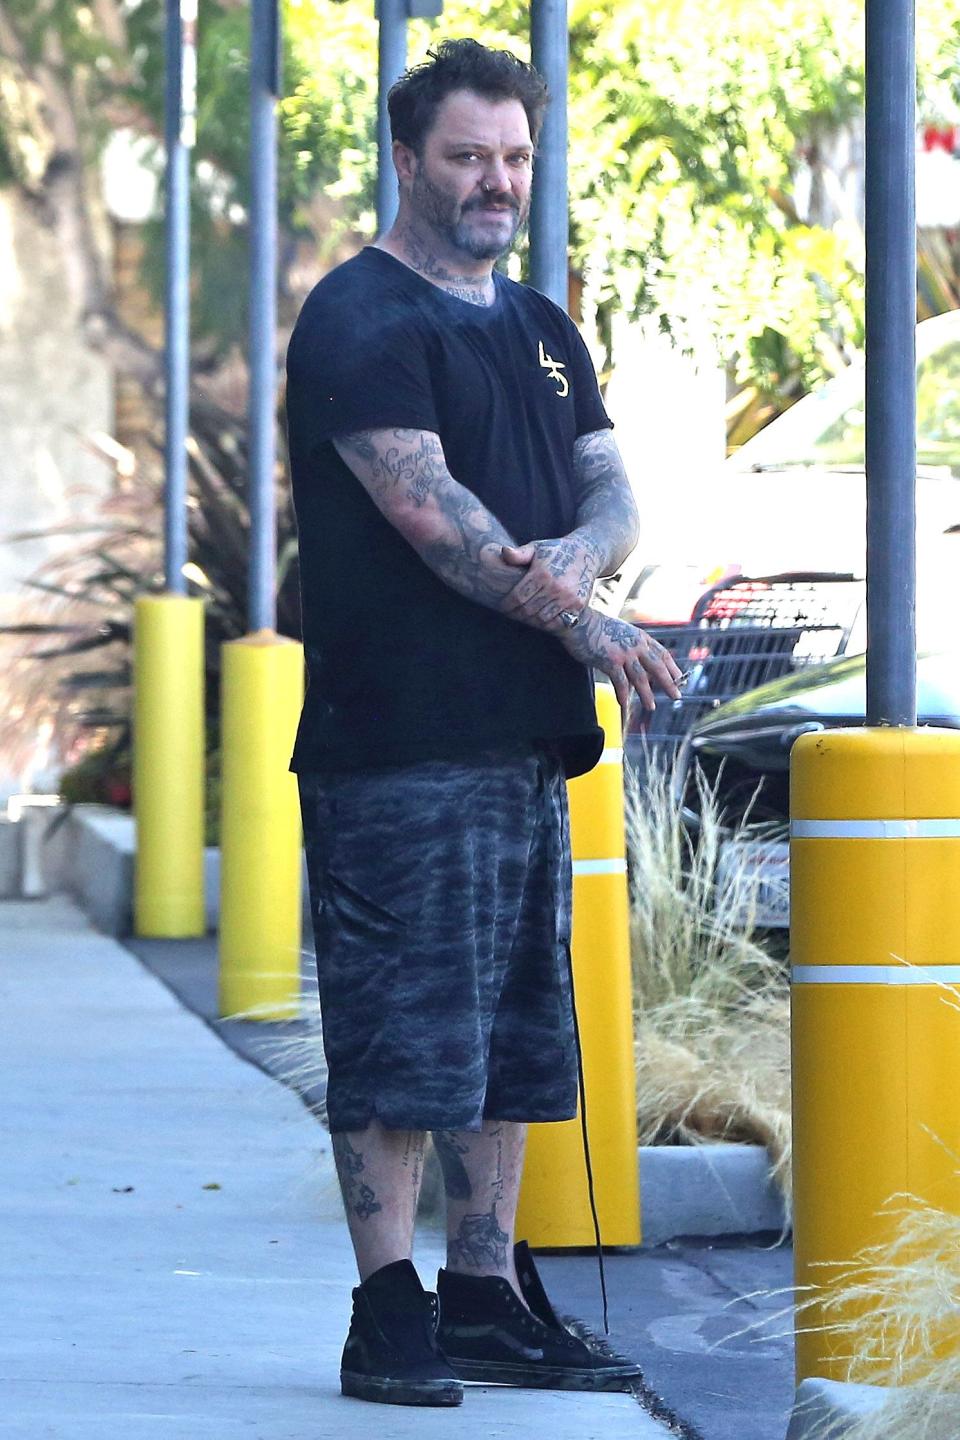 Bam Margera Resurfaces During Rehab Looking Happy with Wife and Son